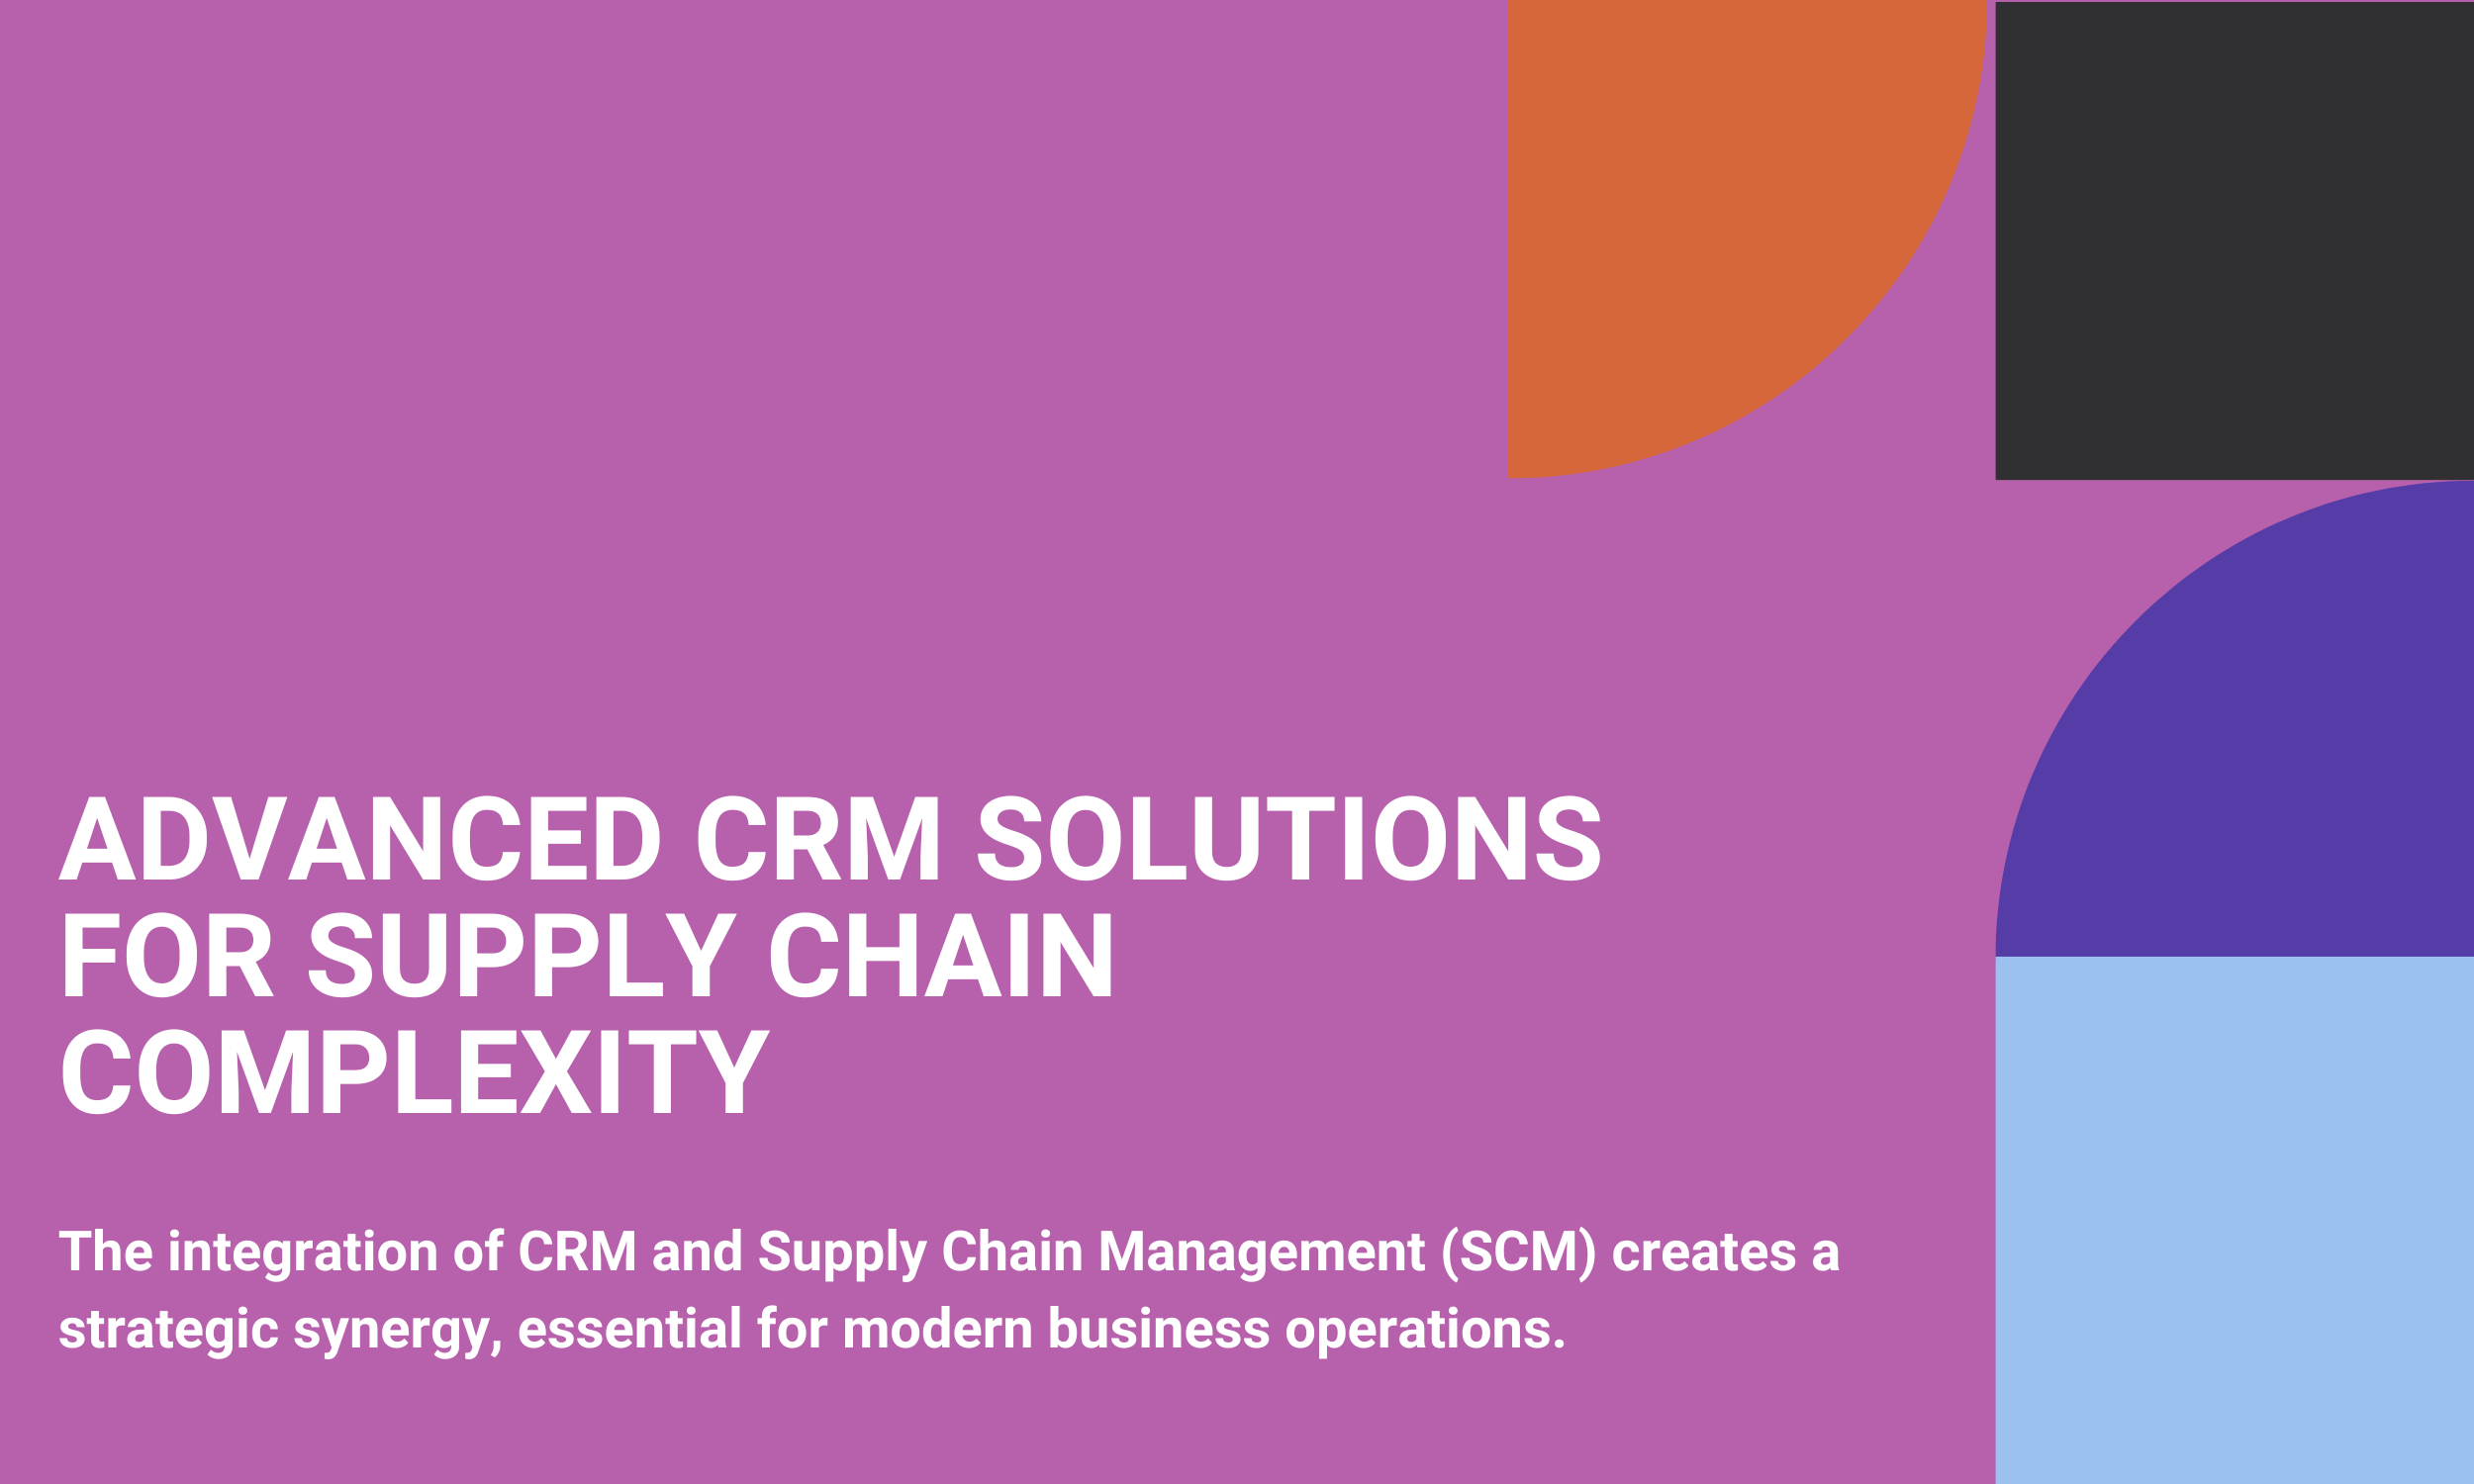 Advanced CRM Solutions for Supply Chain Complexity